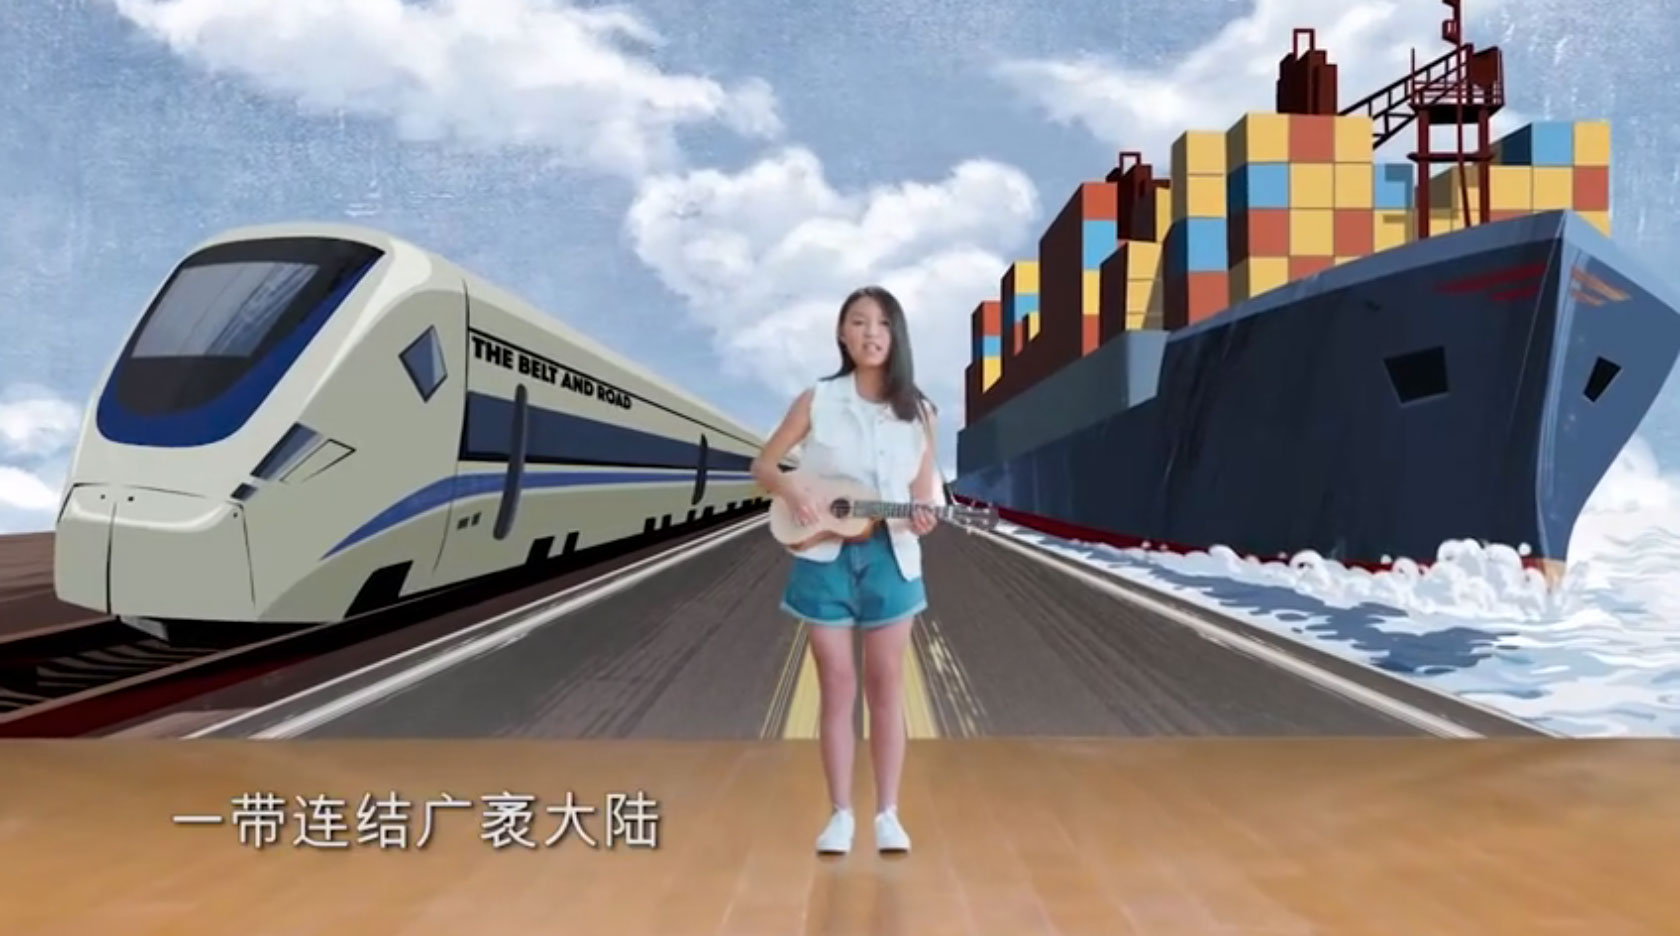 This Music Video for the Belt and Road Forum is Something Else